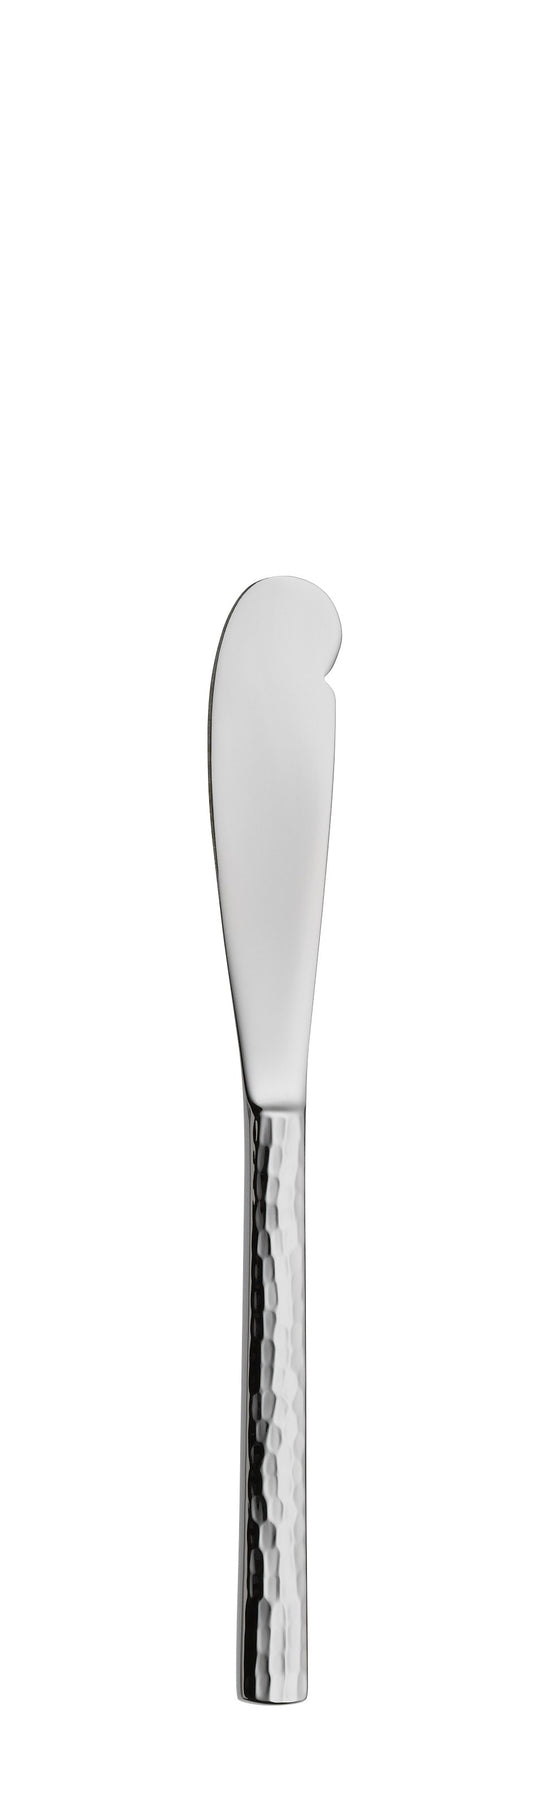 Butter knife LENISTA silverplated 170mm